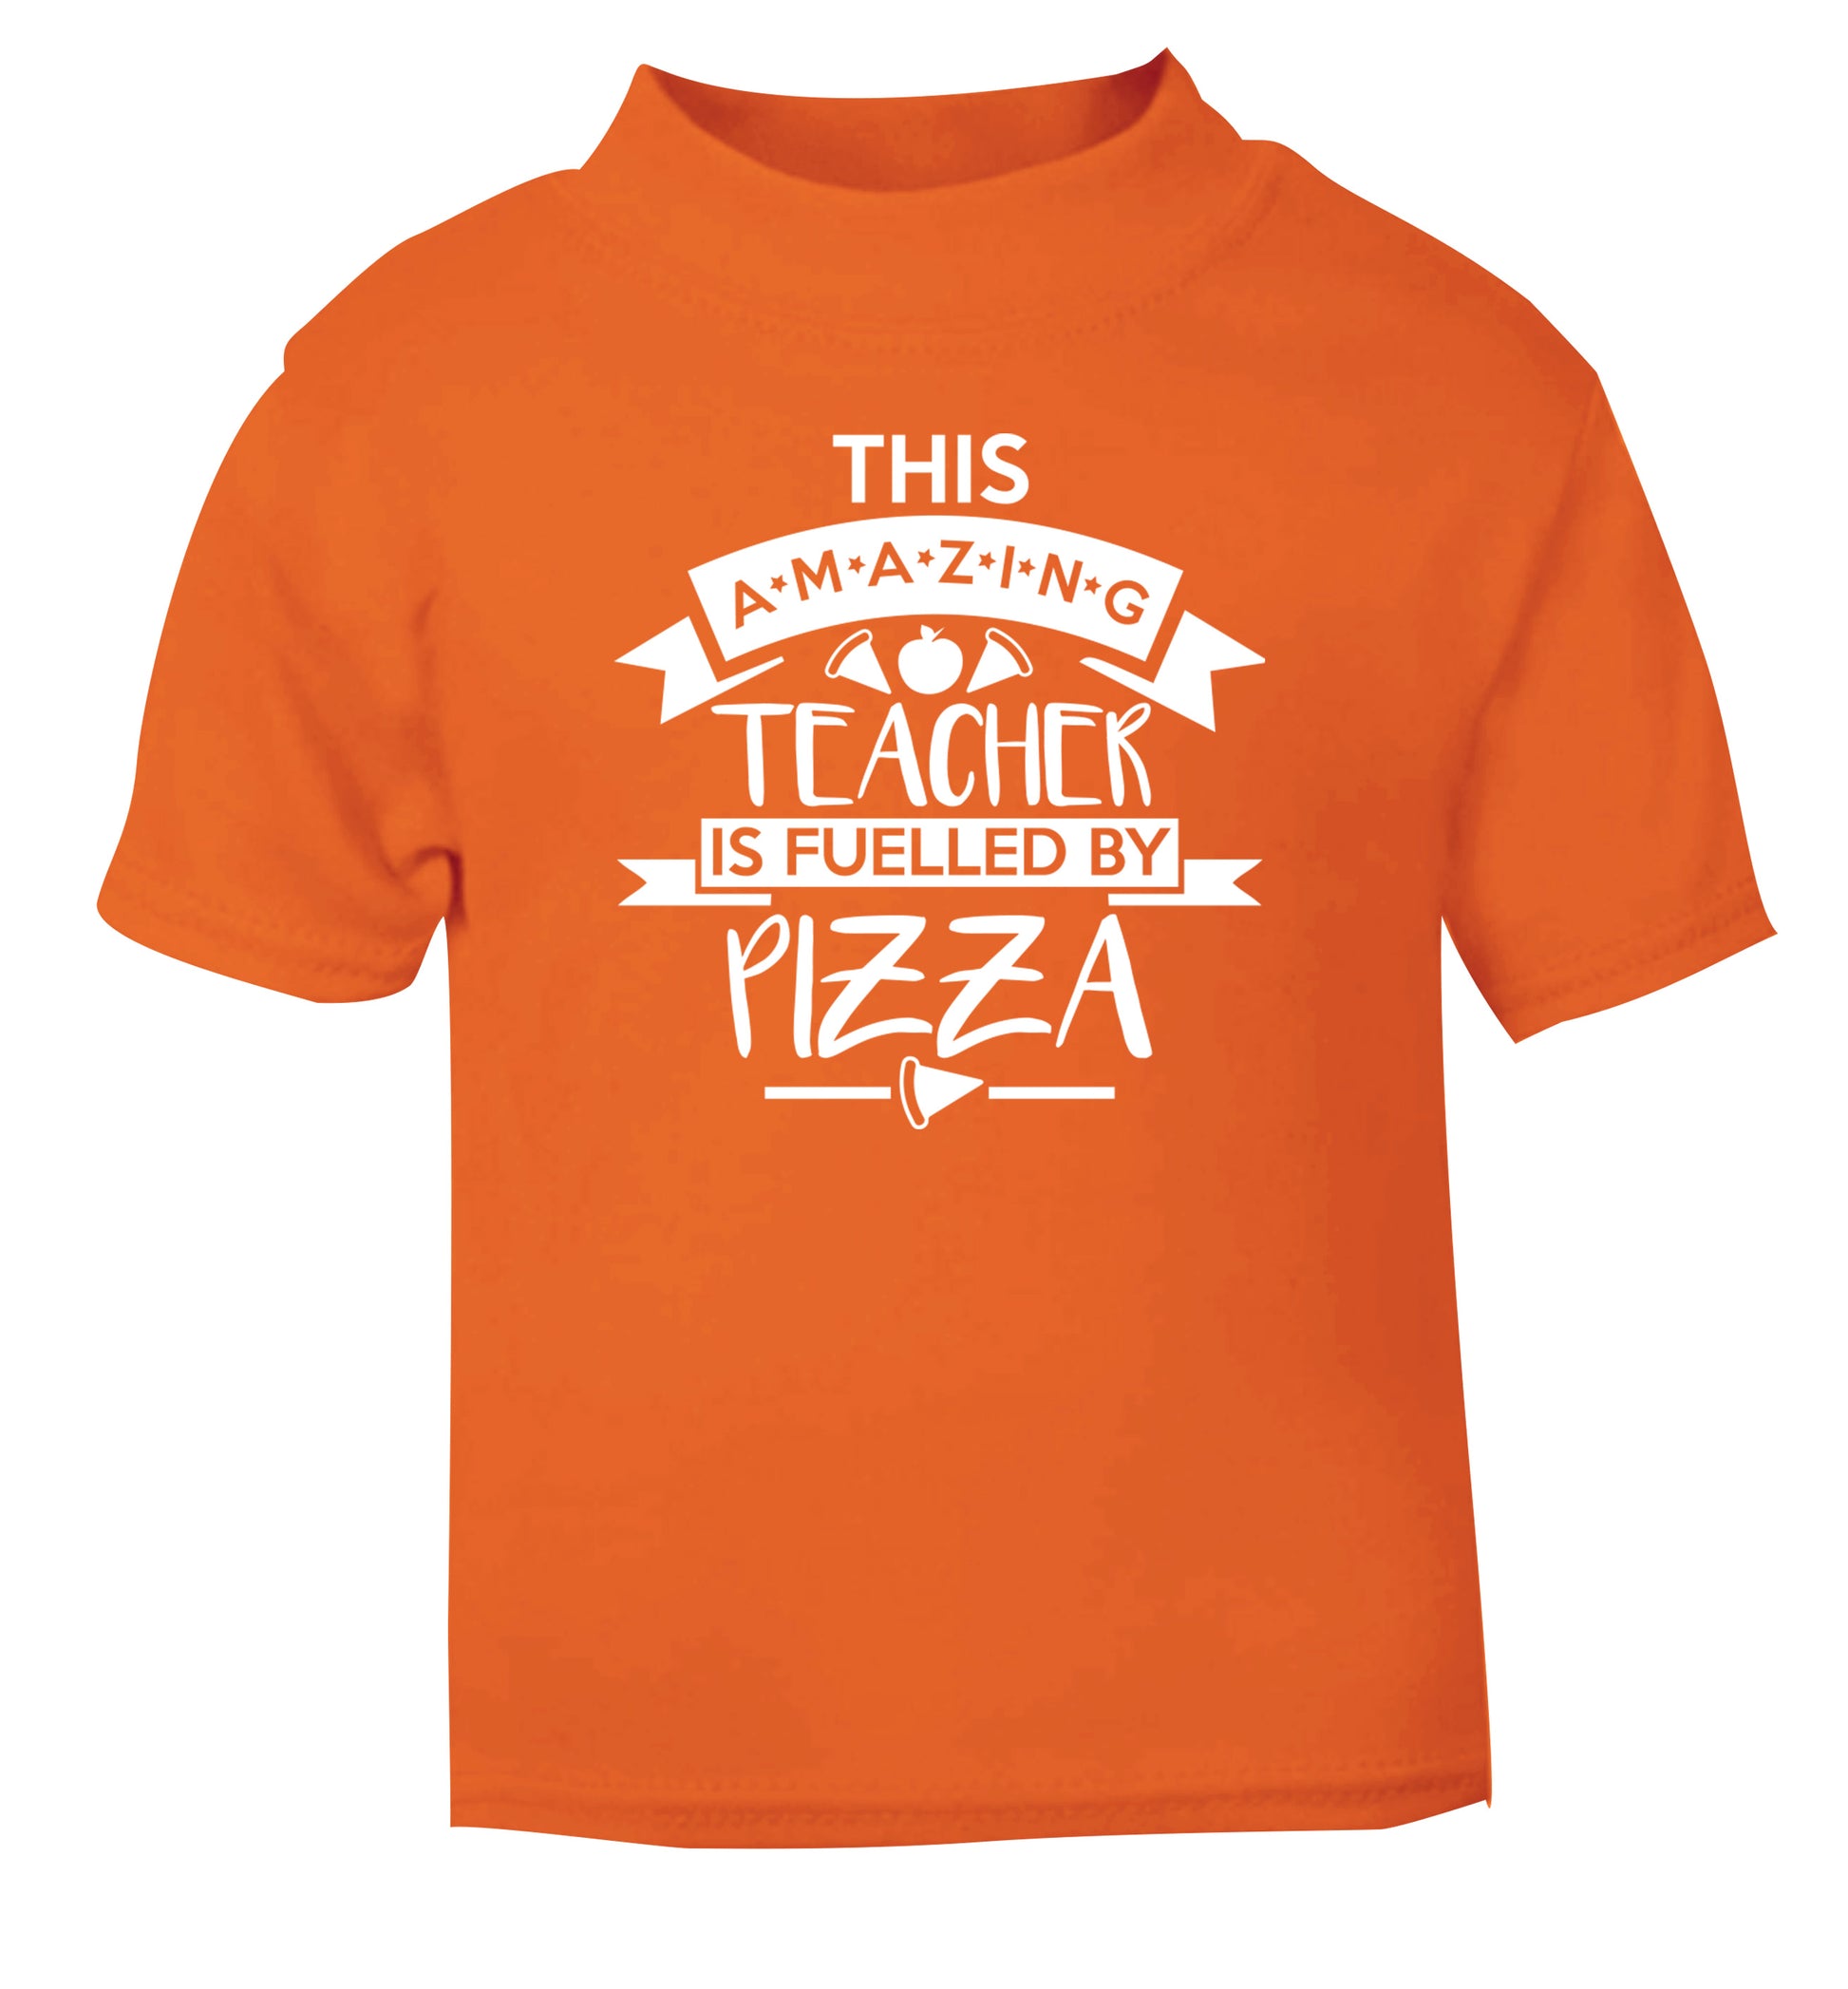 This amazing teacher is fuelled by pizza orange Baby Toddler Tshirt 2 Years